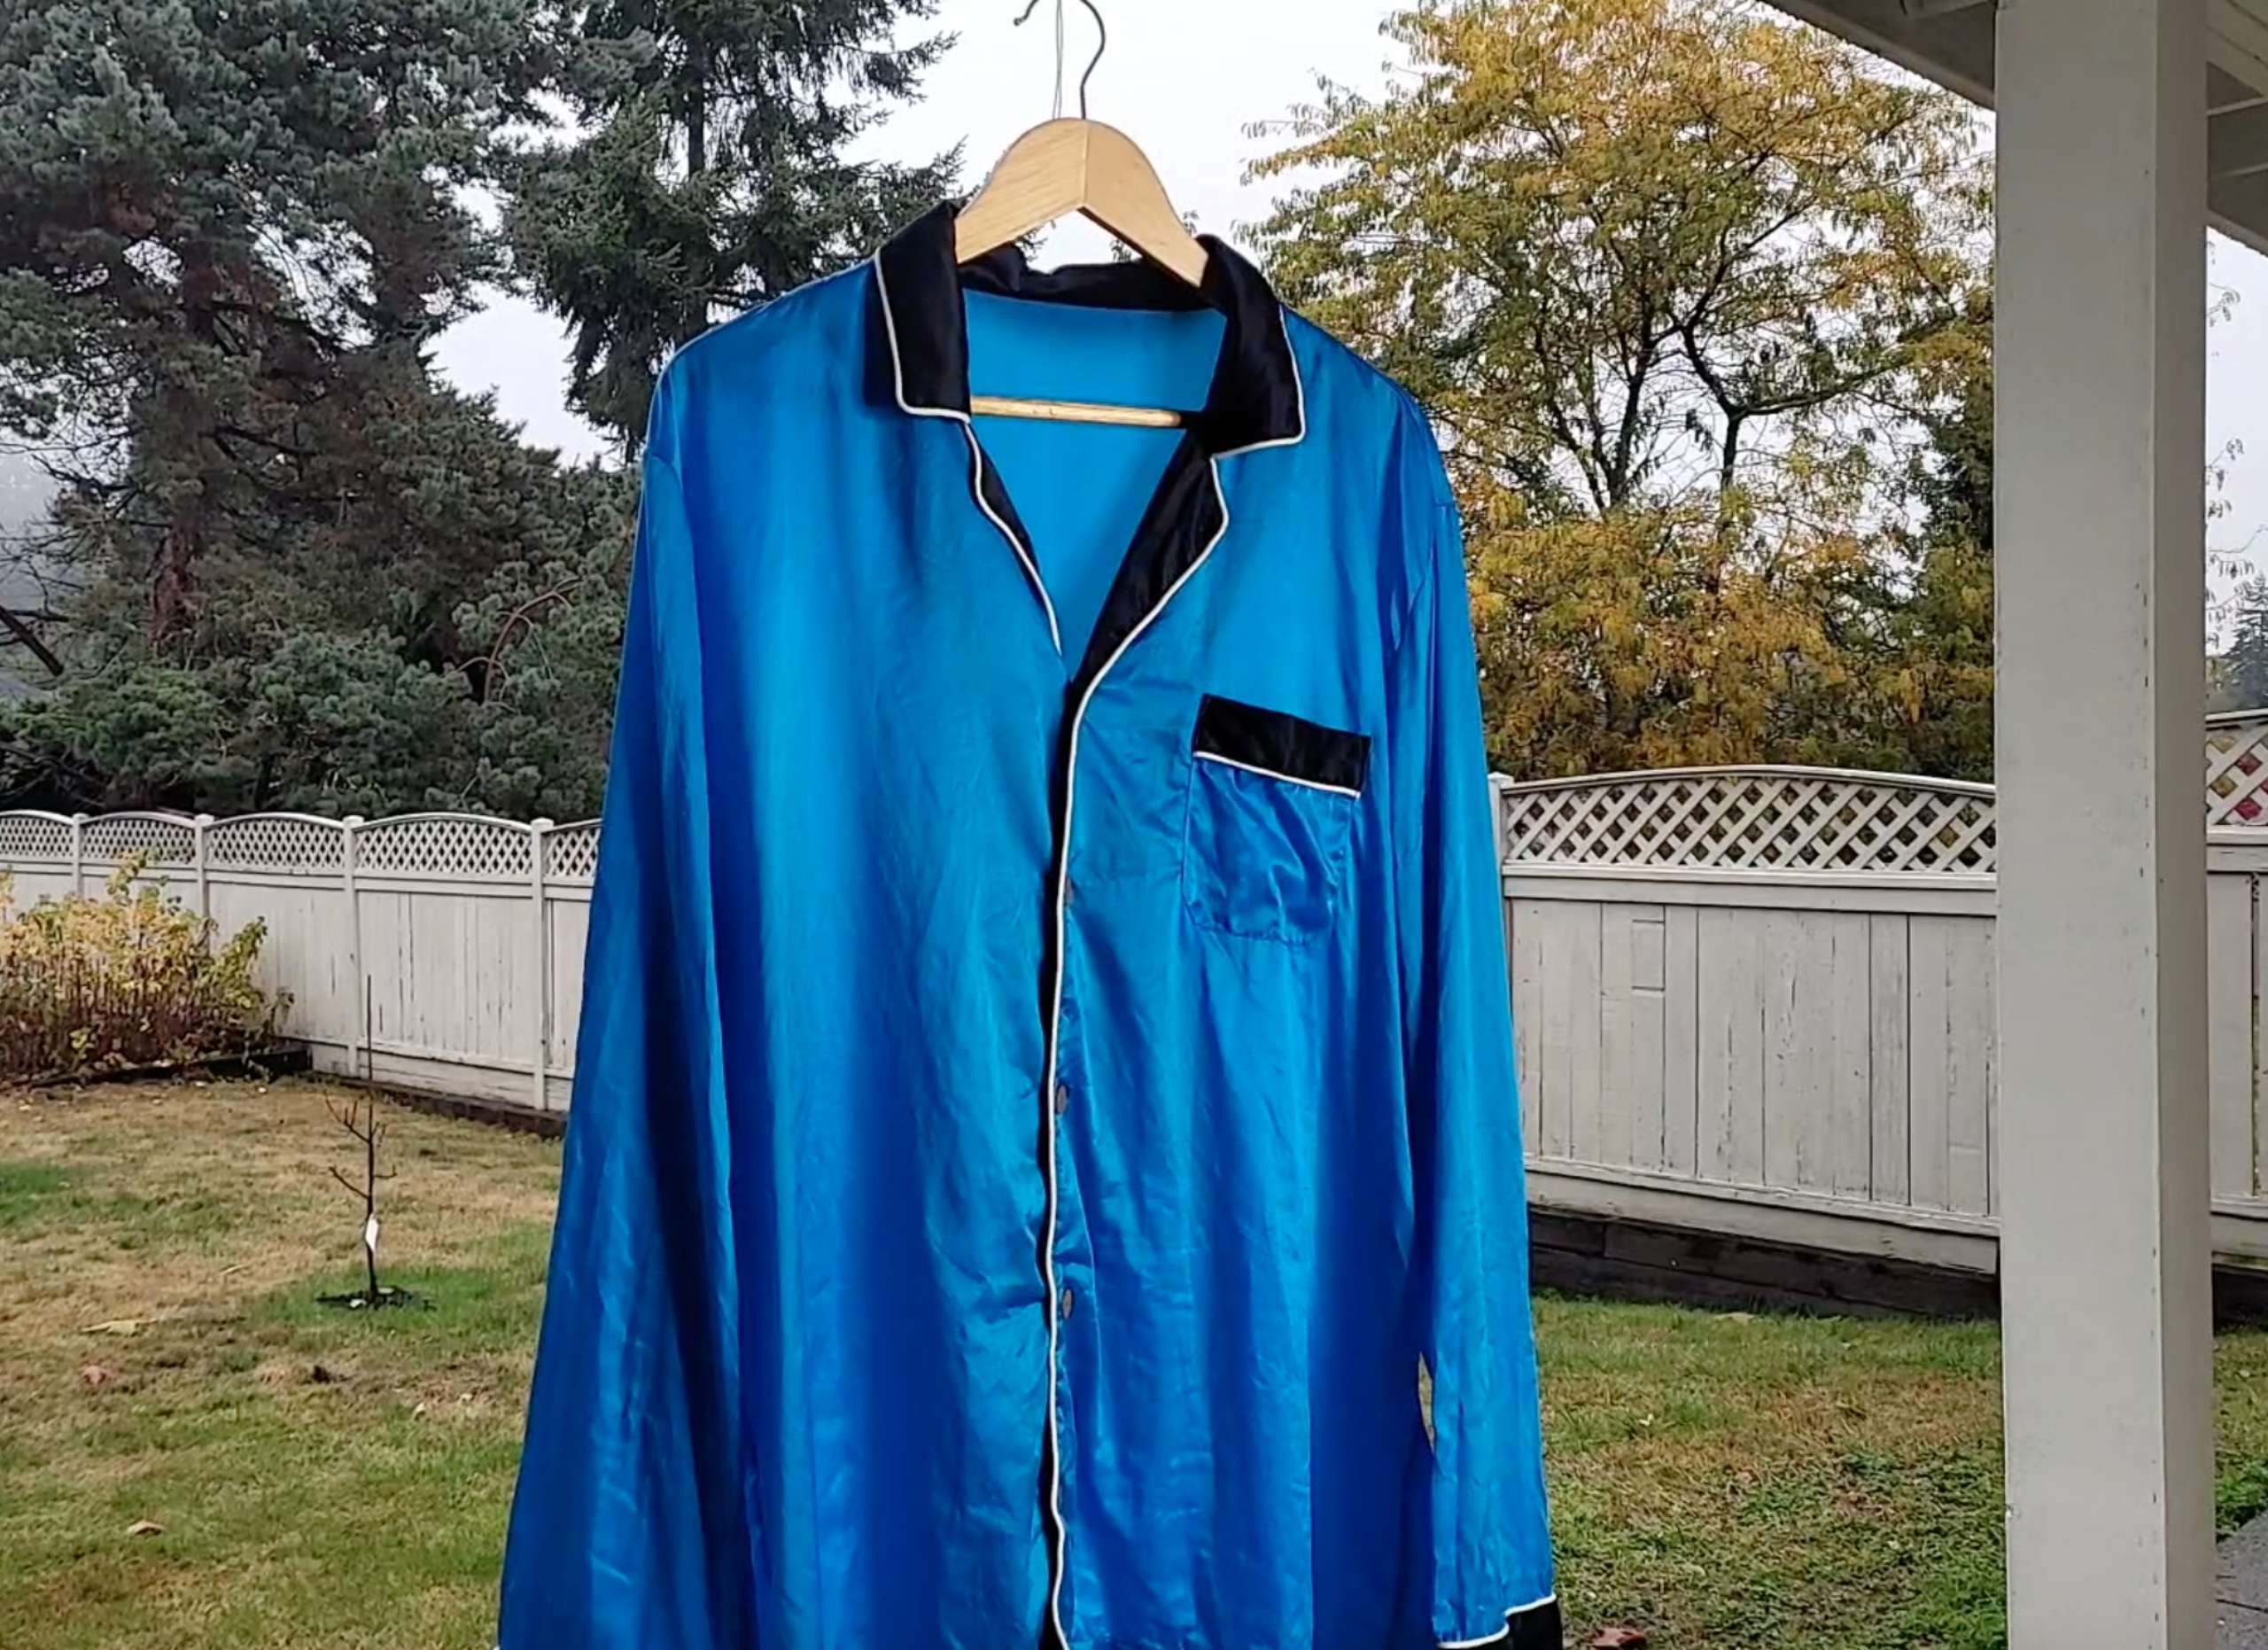 photo of a blue satin shirt hanging out to air dry outside in a shaded area